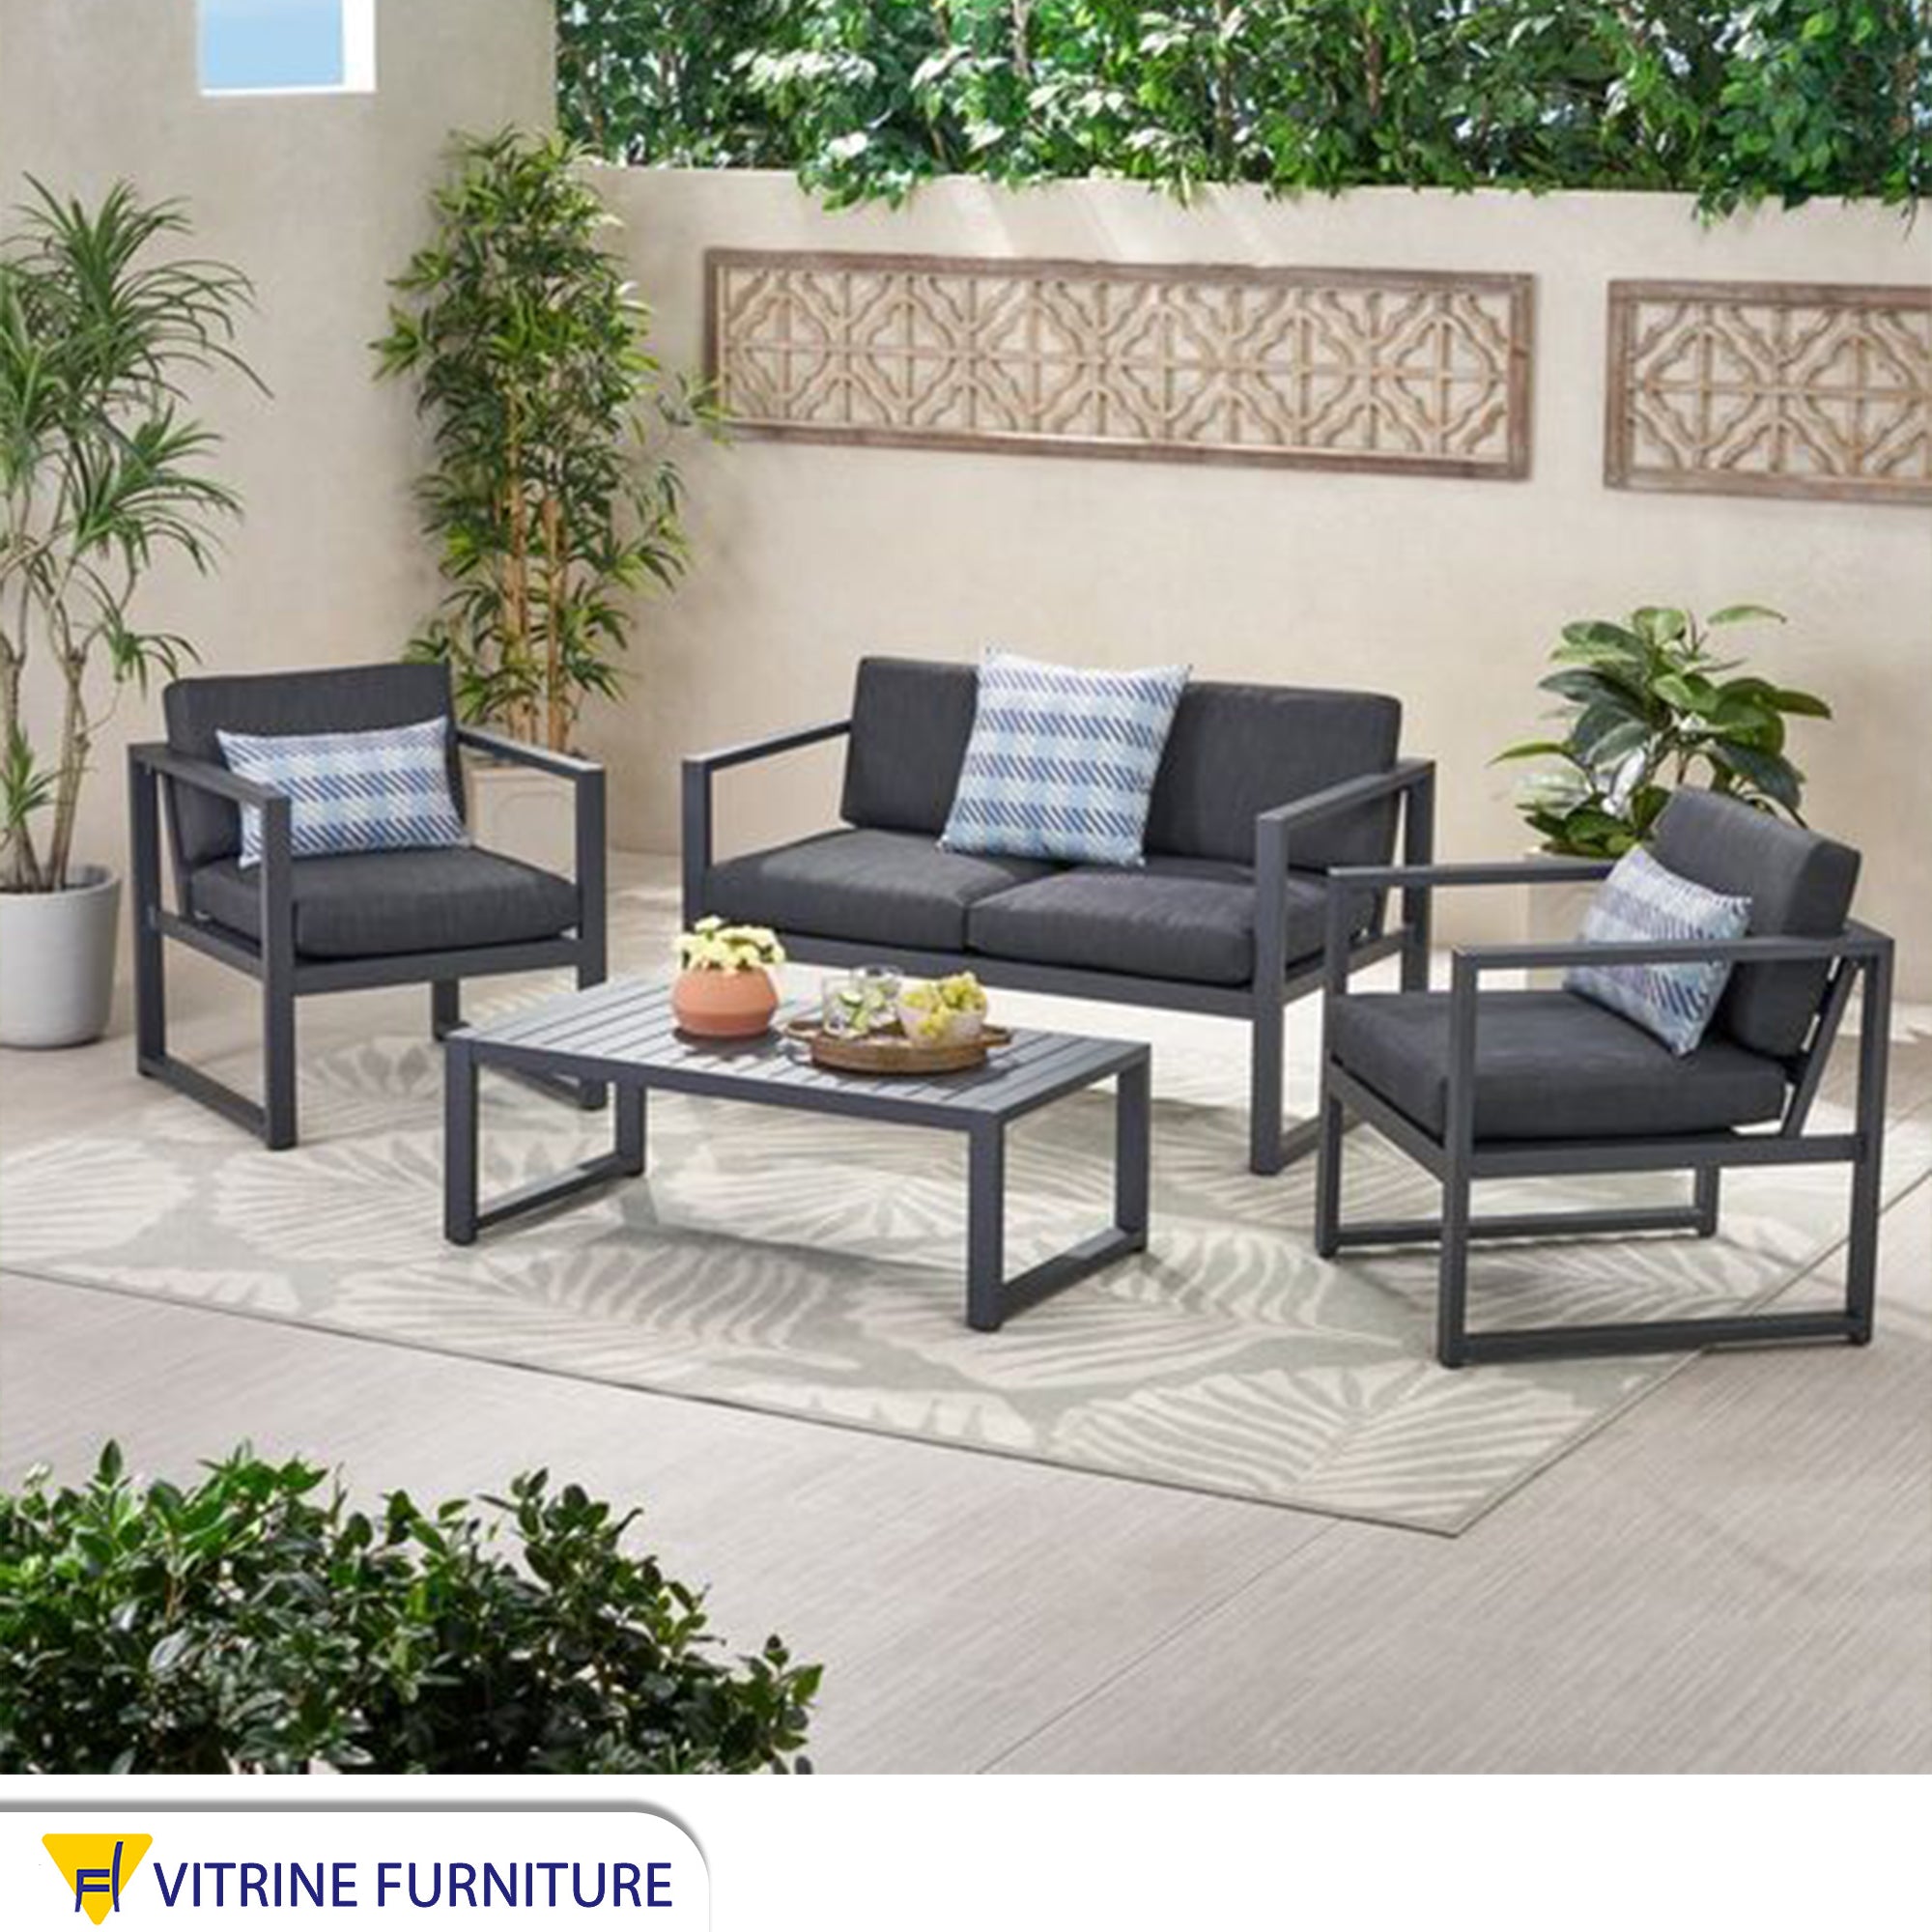 Outdoor seating set with steel frame